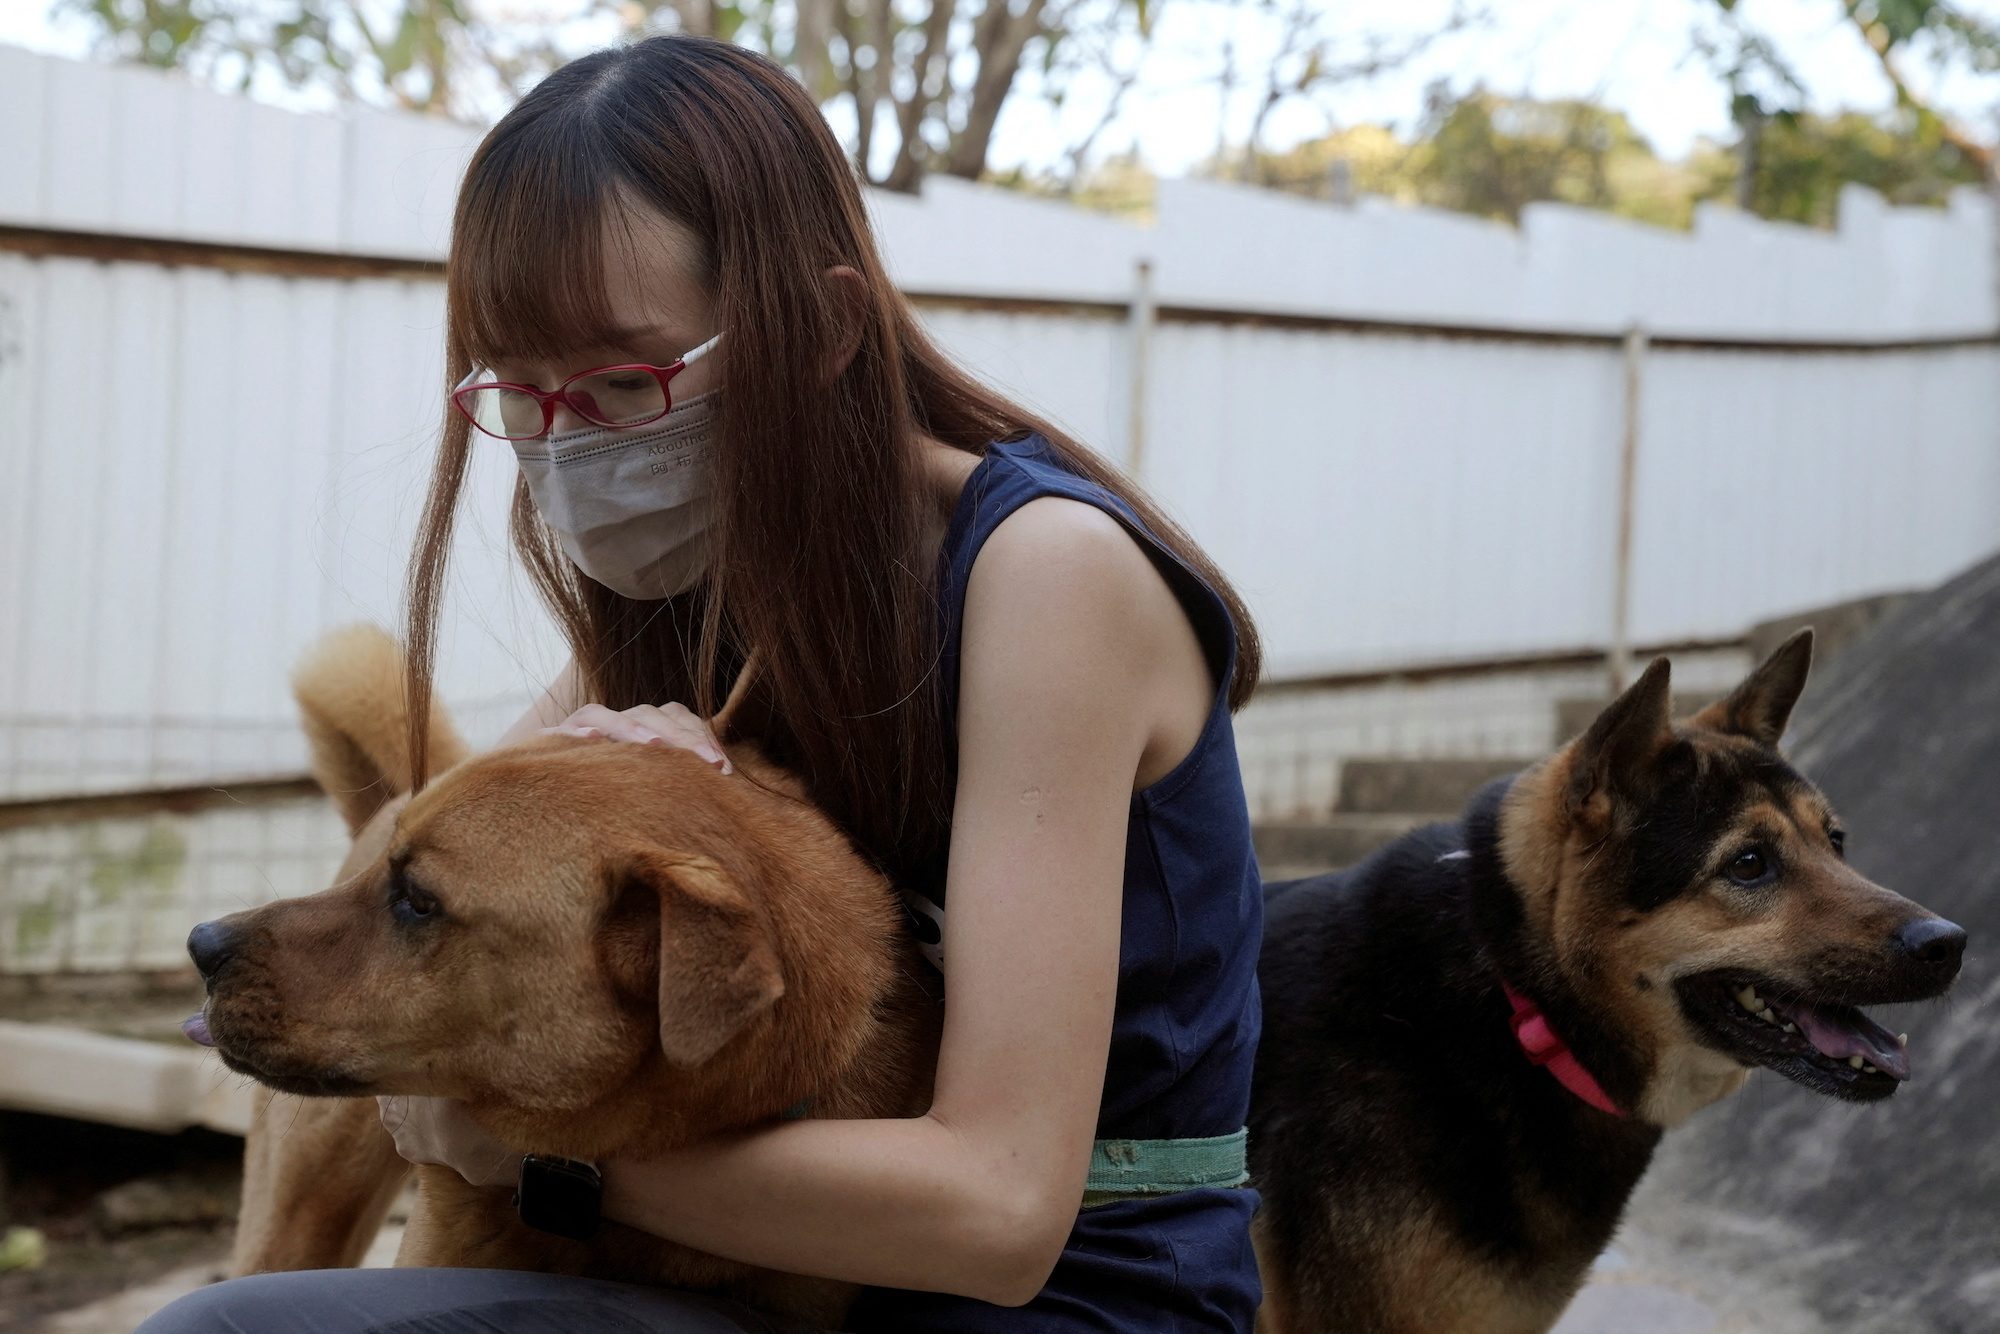 Many people abandoning pets as they leave Hong Kong over COVID rules